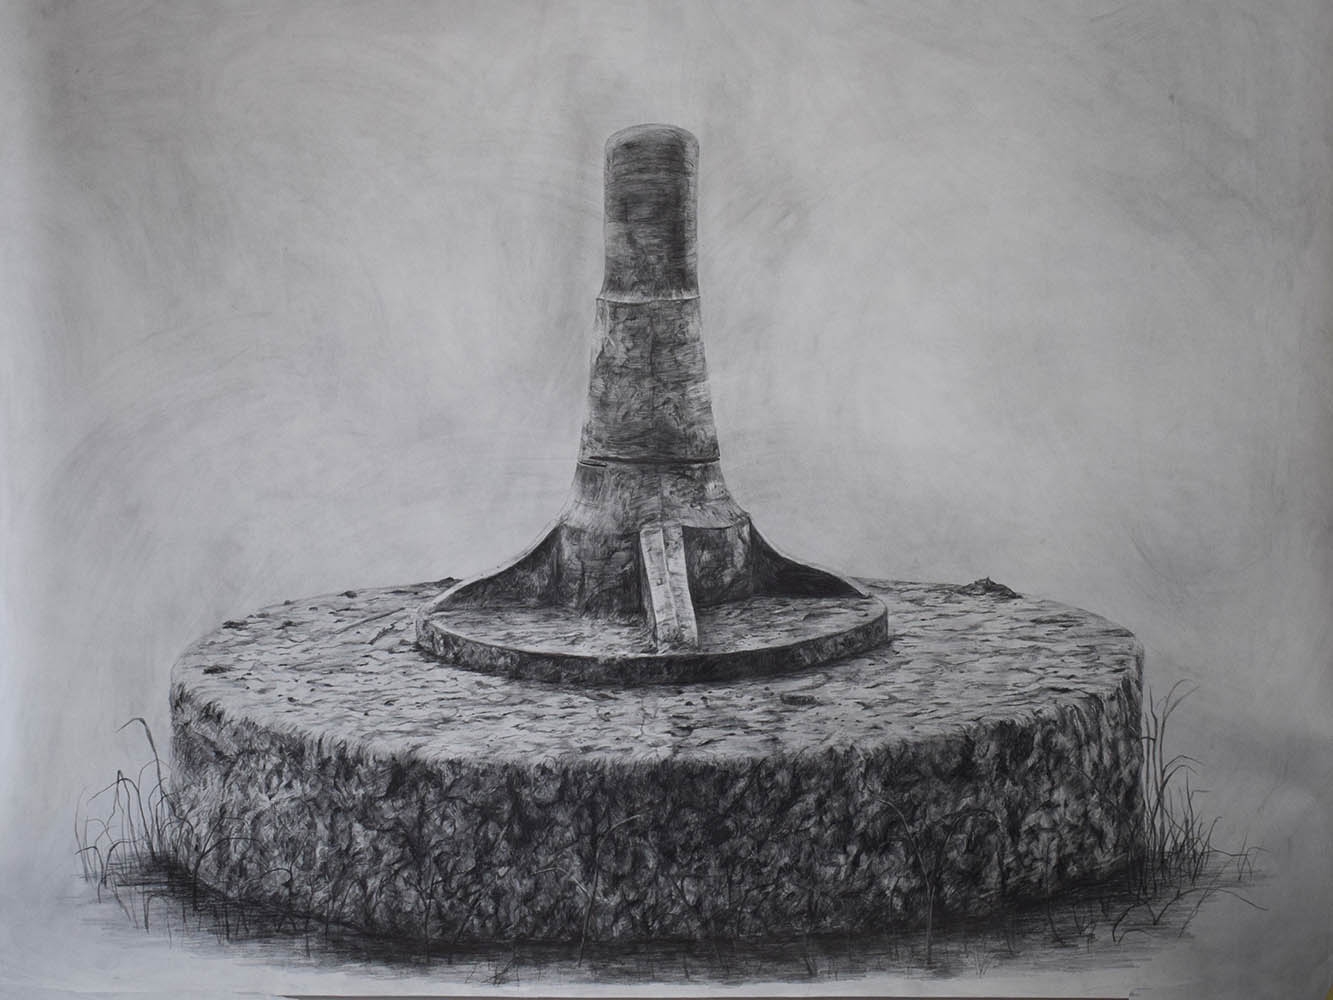 Black and white sketch of a millstone